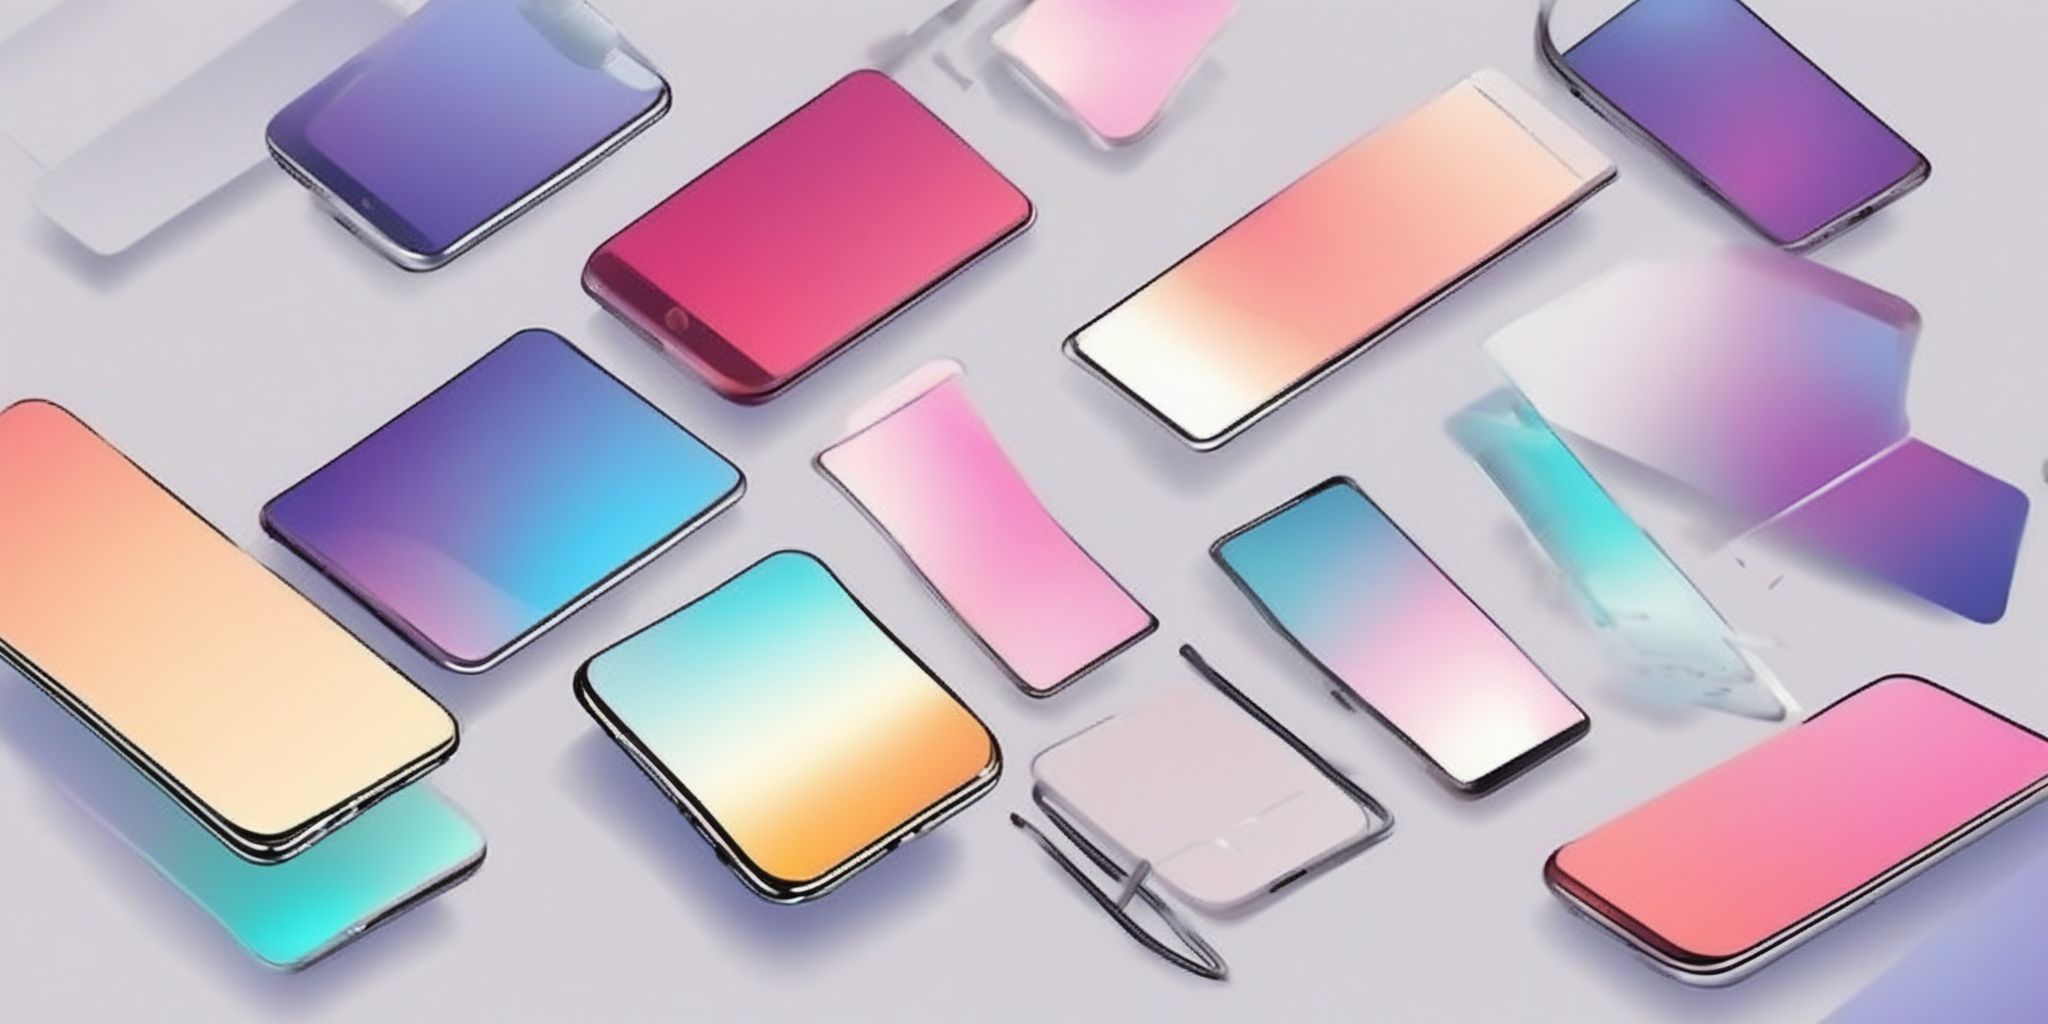 Smartphone in illustration style with gradients and white background